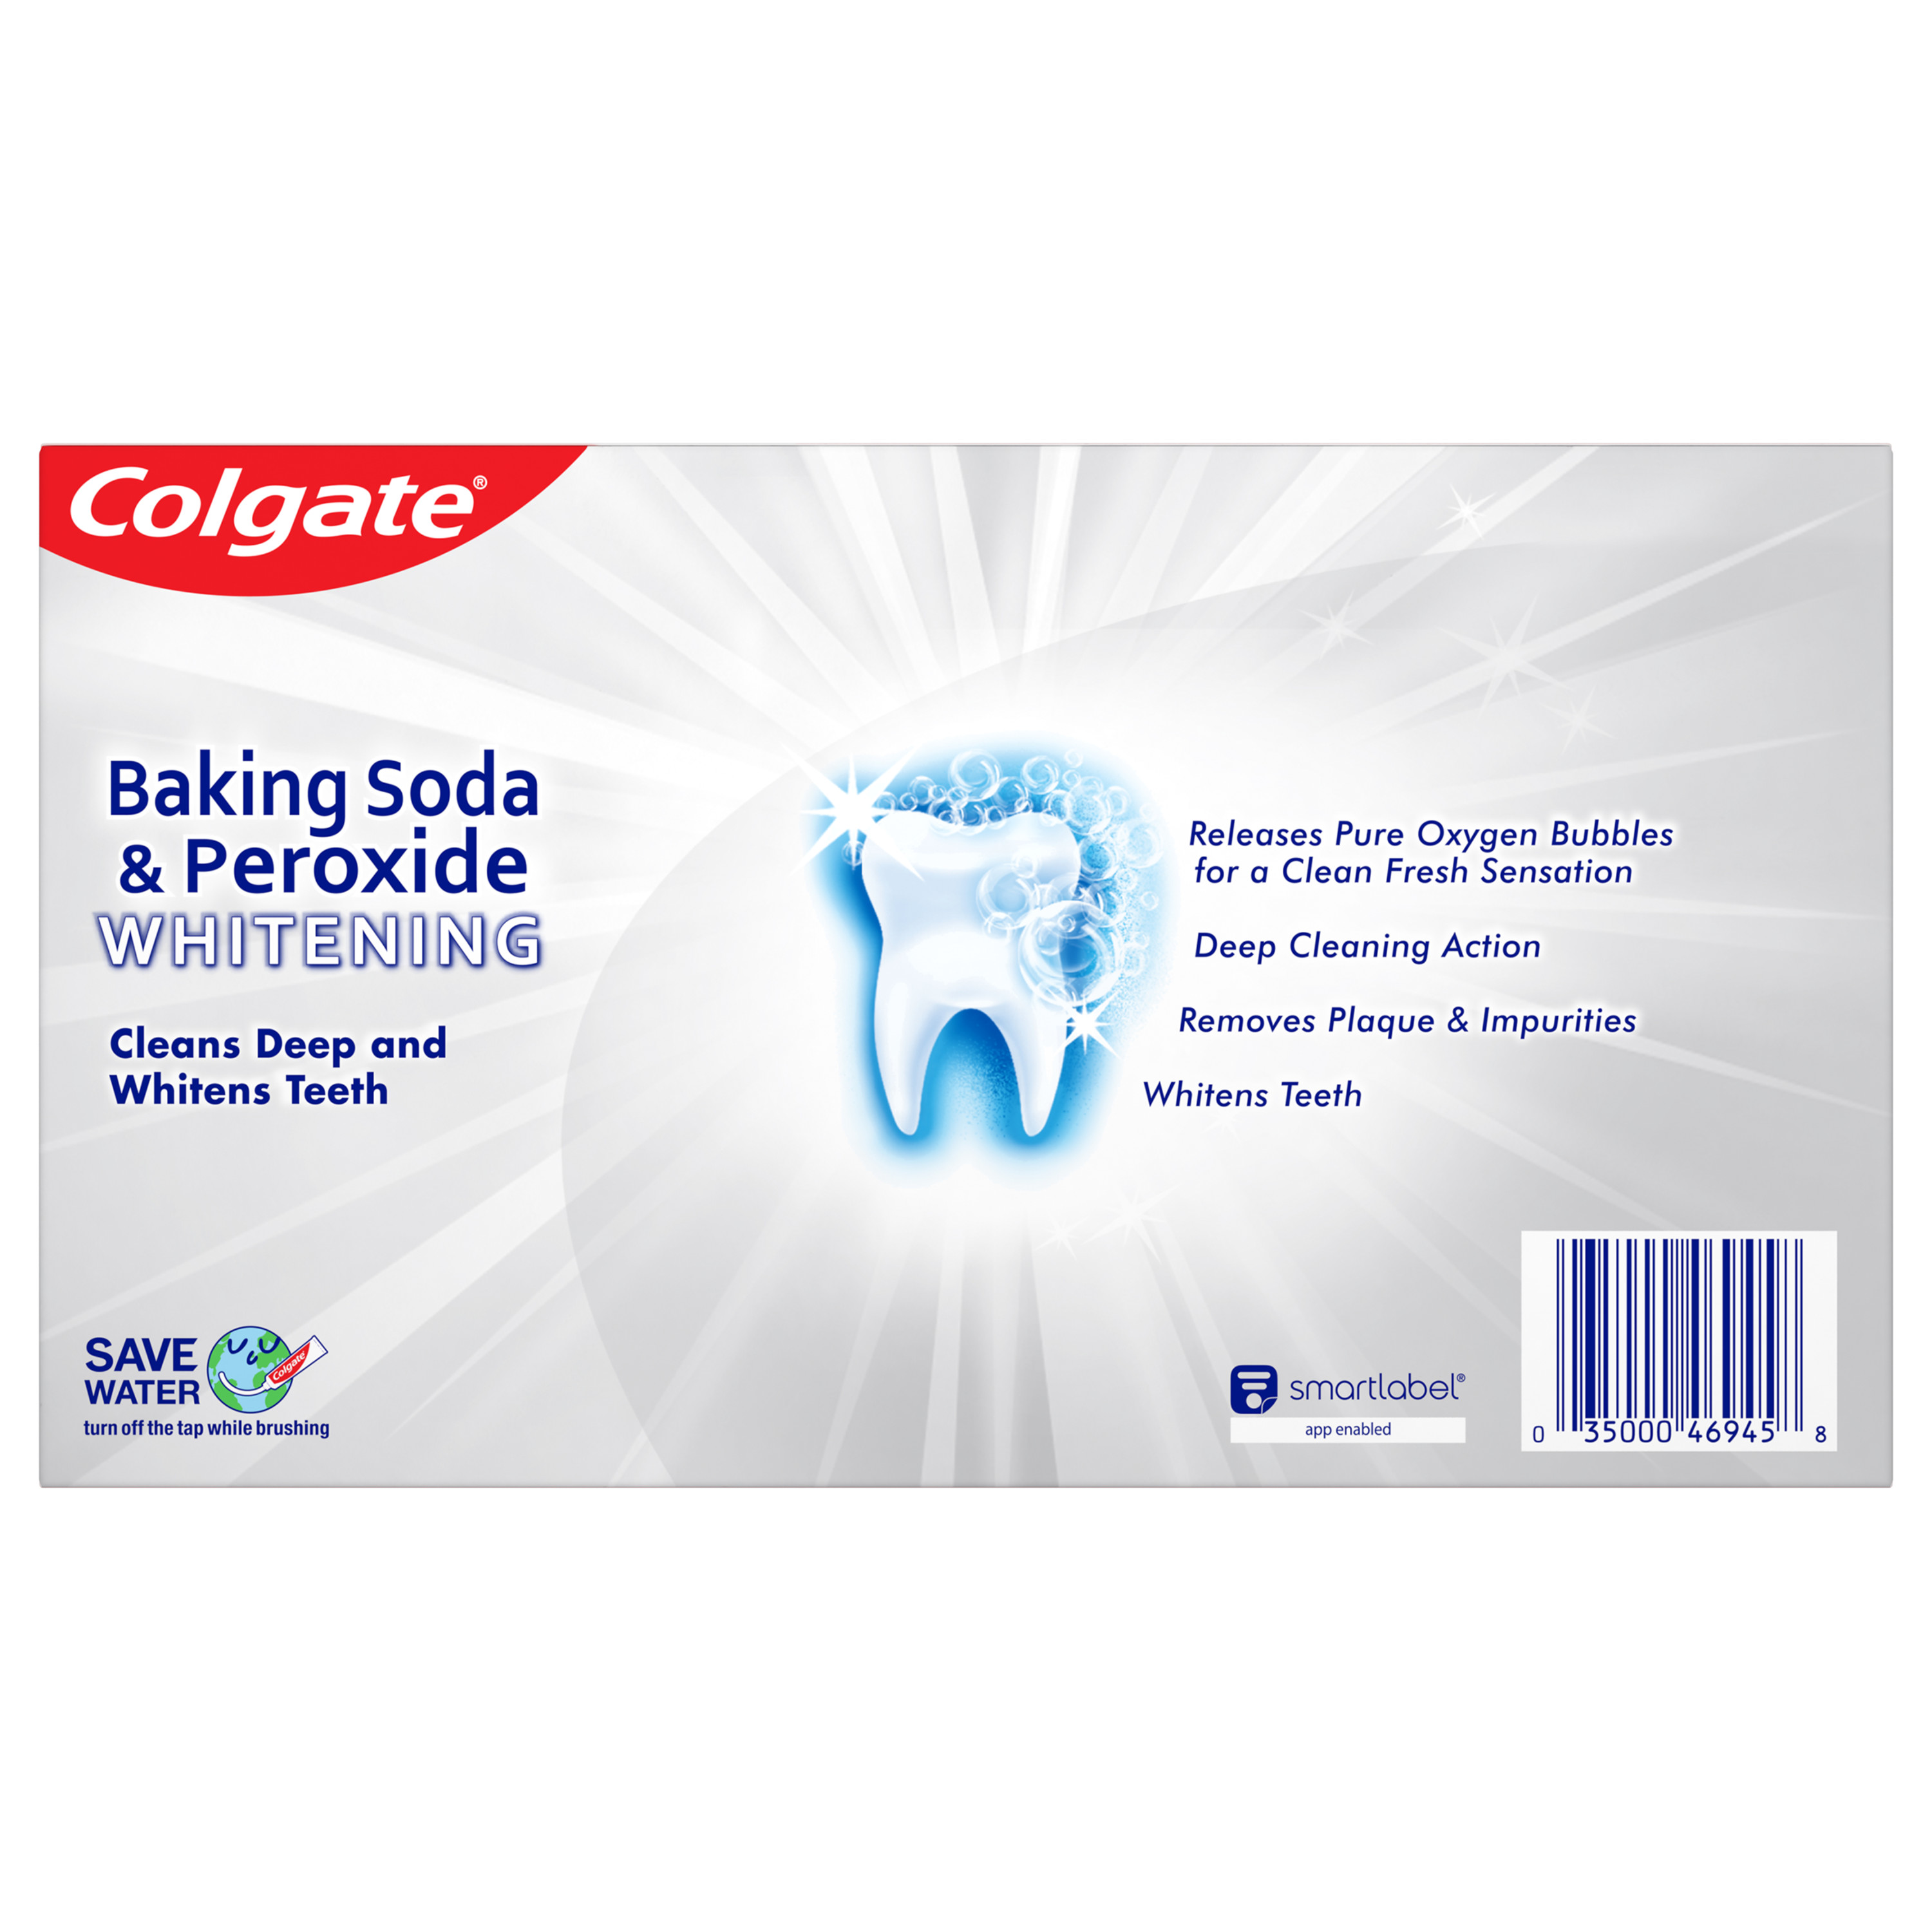 Colgate Baking Soda and Peroxide Whitening Toothpaste, Brisk Mint, 3 Pack - image 2 of 5